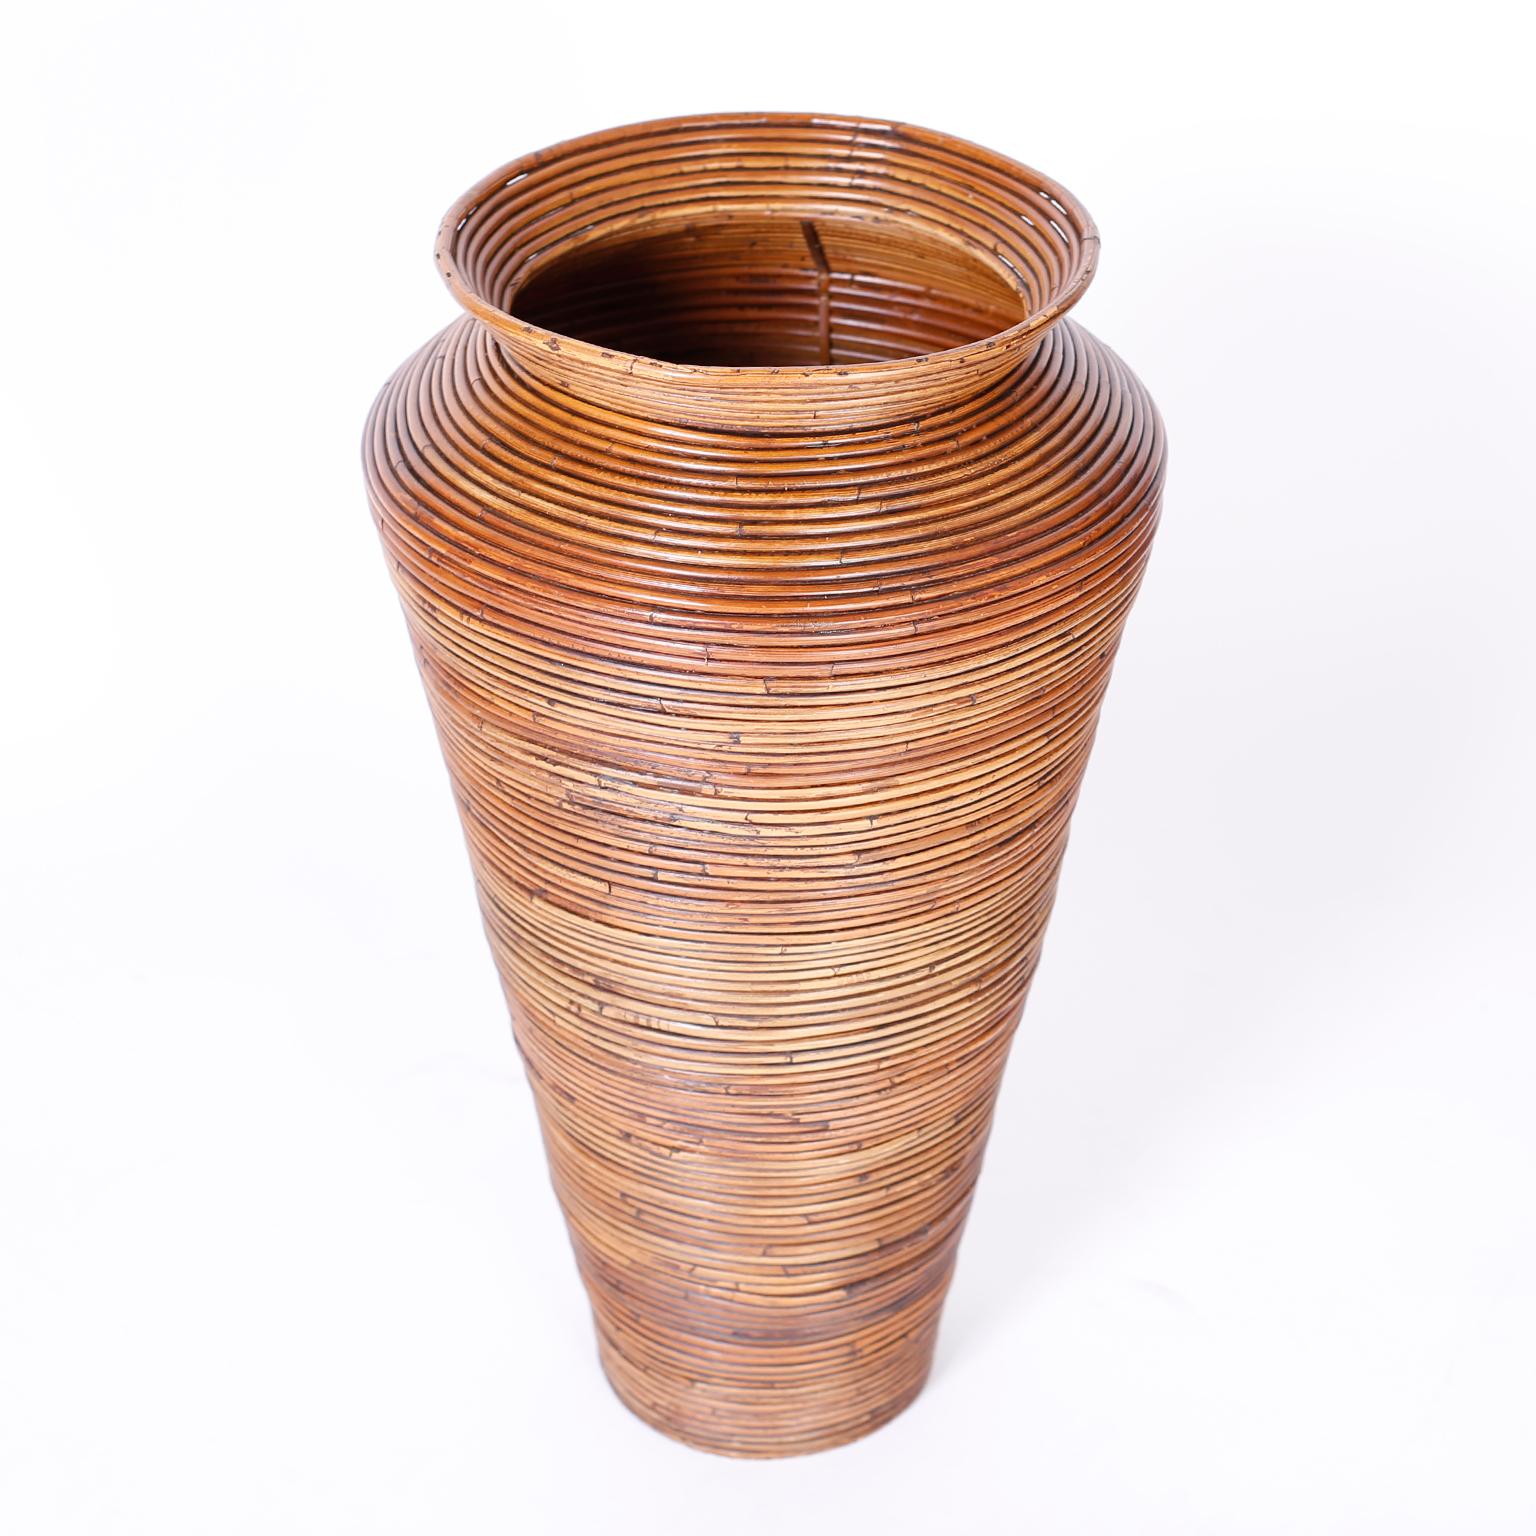 Large scale mid century faux vase crafted with pencil reed in an ingenious bending technique with a classic modern form.